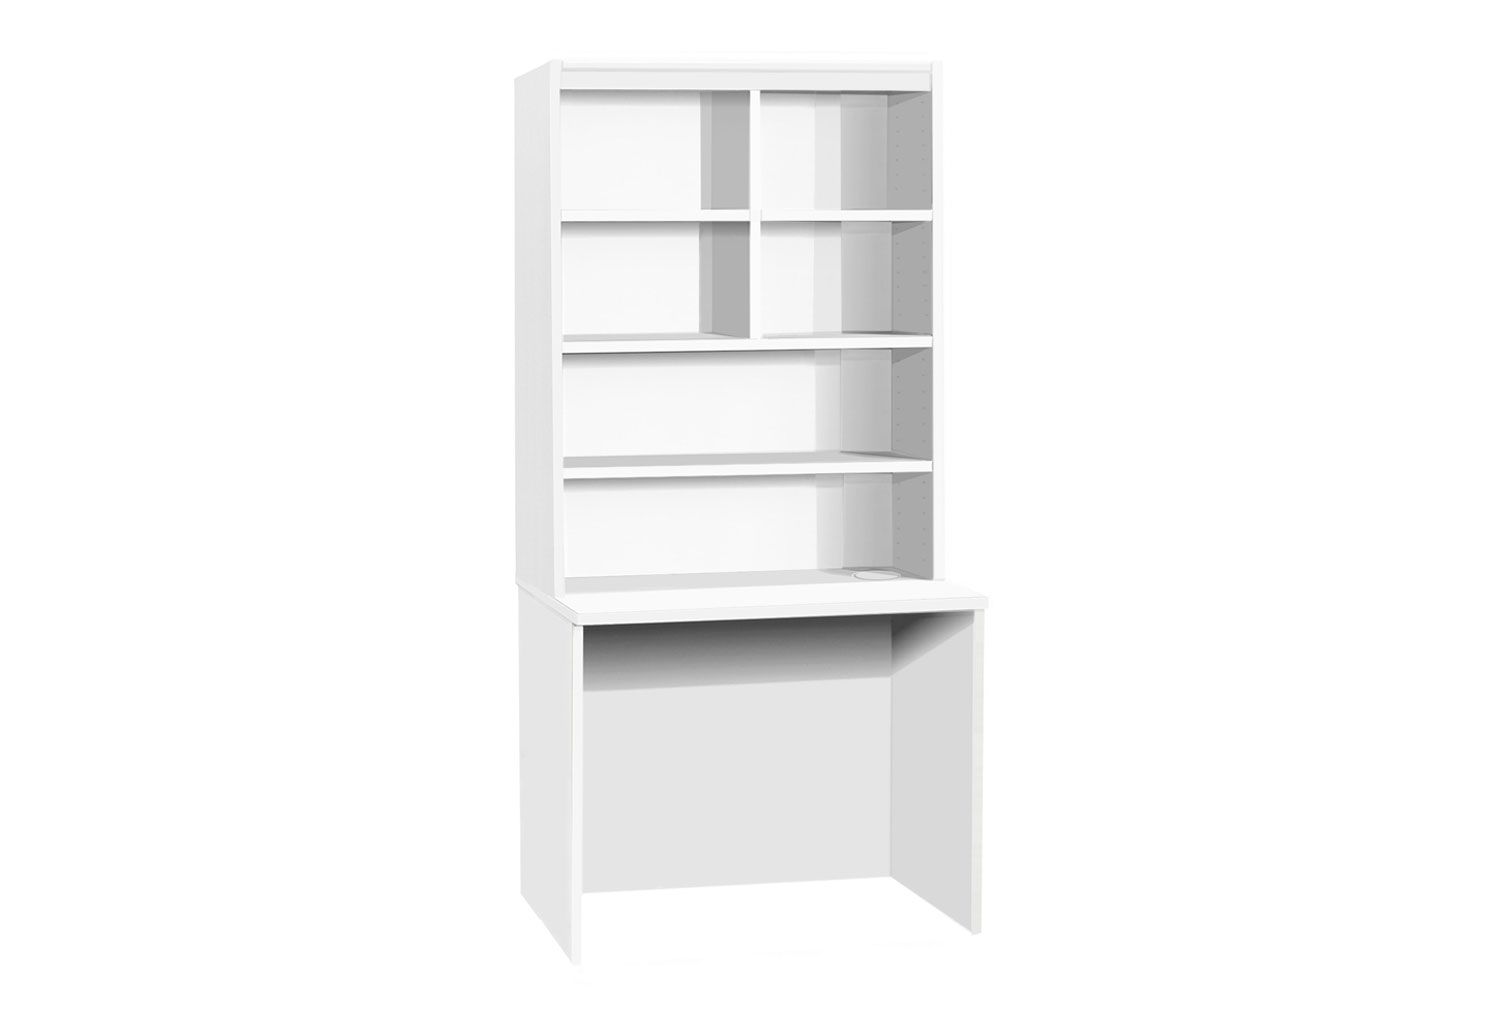 Small Office Rectangular Home Office Desk With Hutch Bookcase (White), 85wx54dx182h (cm)